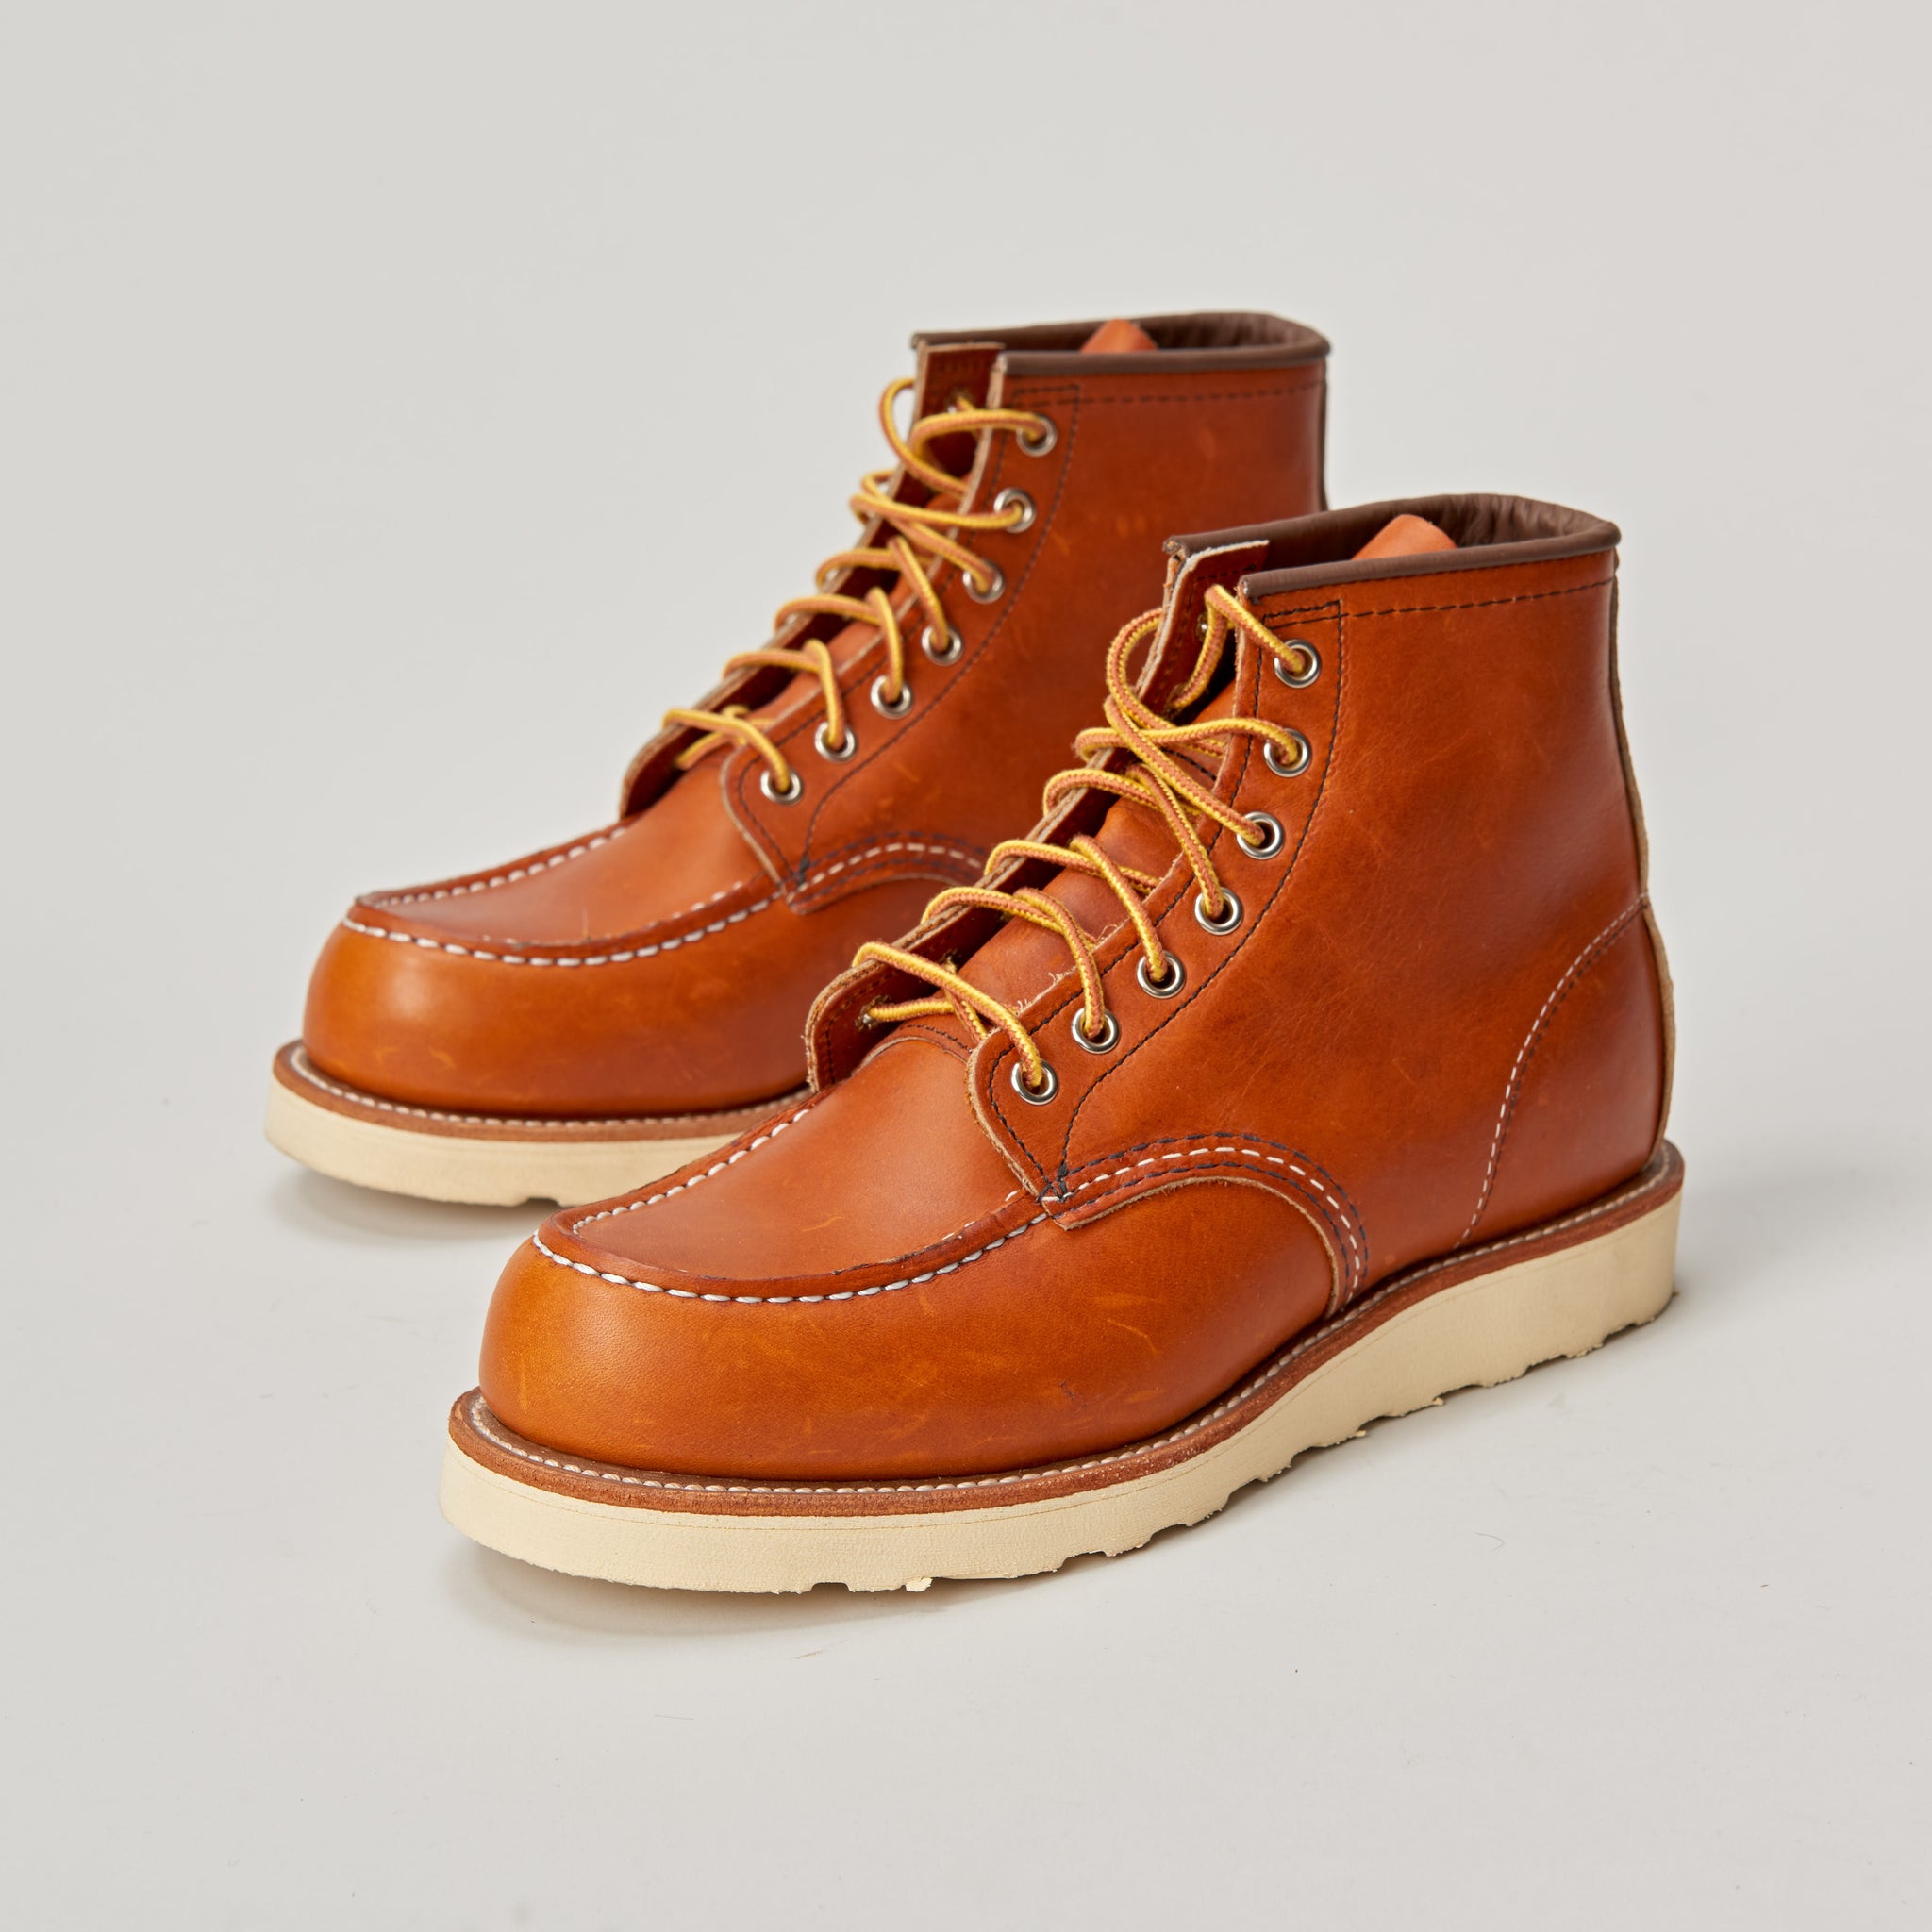 classic red wing boots